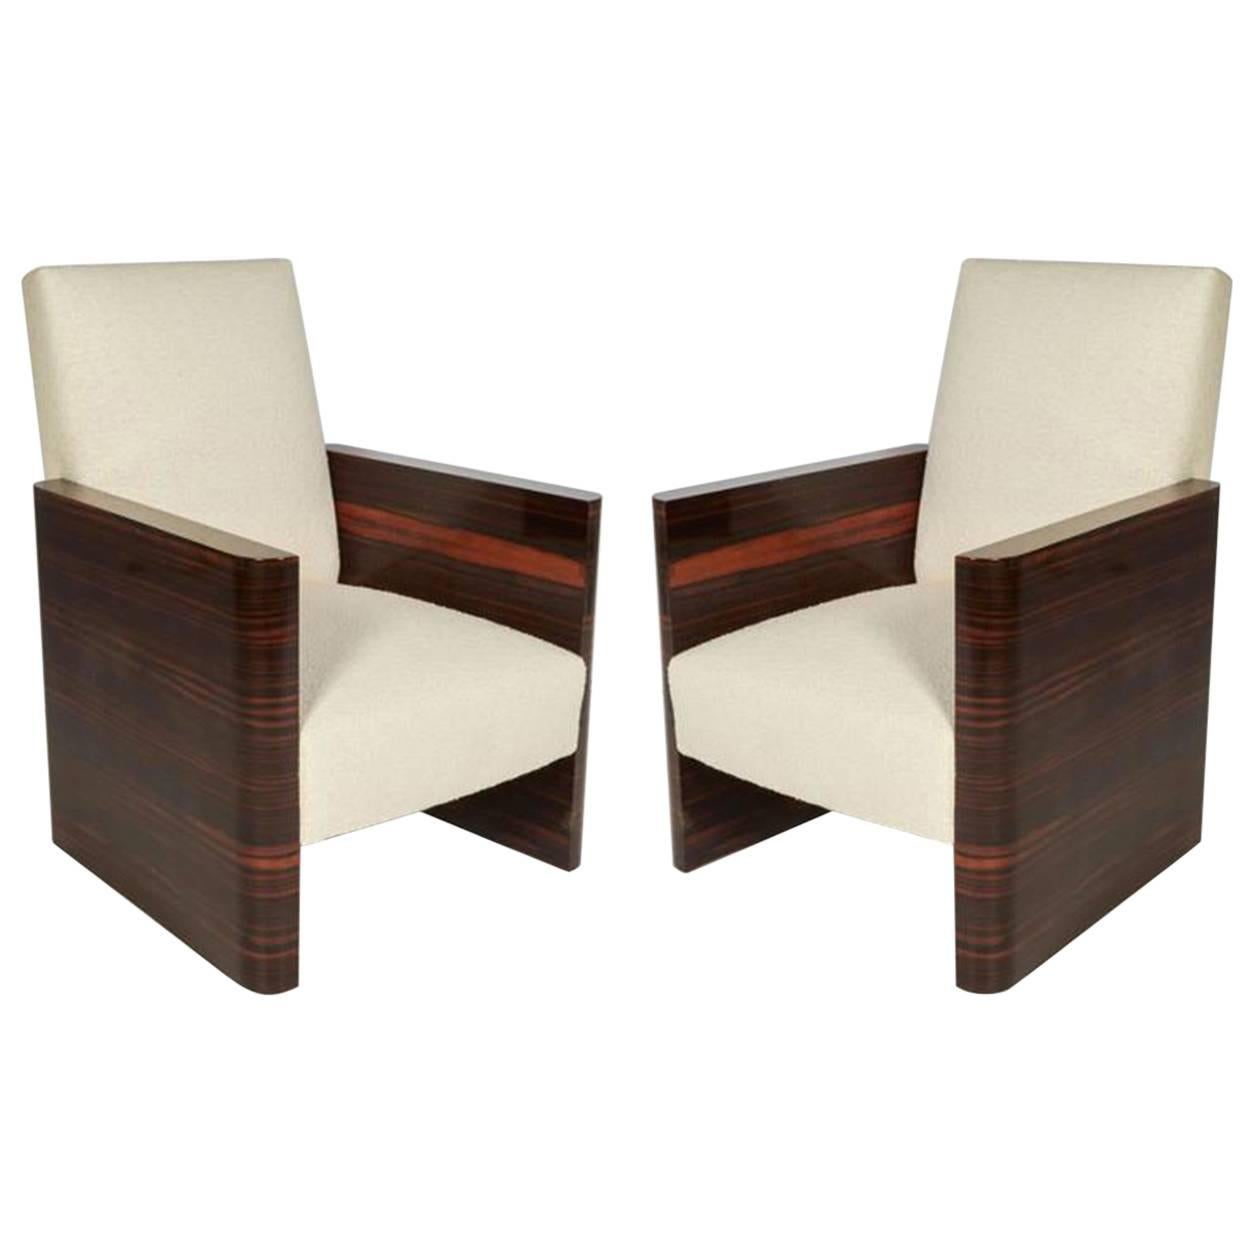 Pair of French Art Deco Macassar Wood Armchairs For Sale